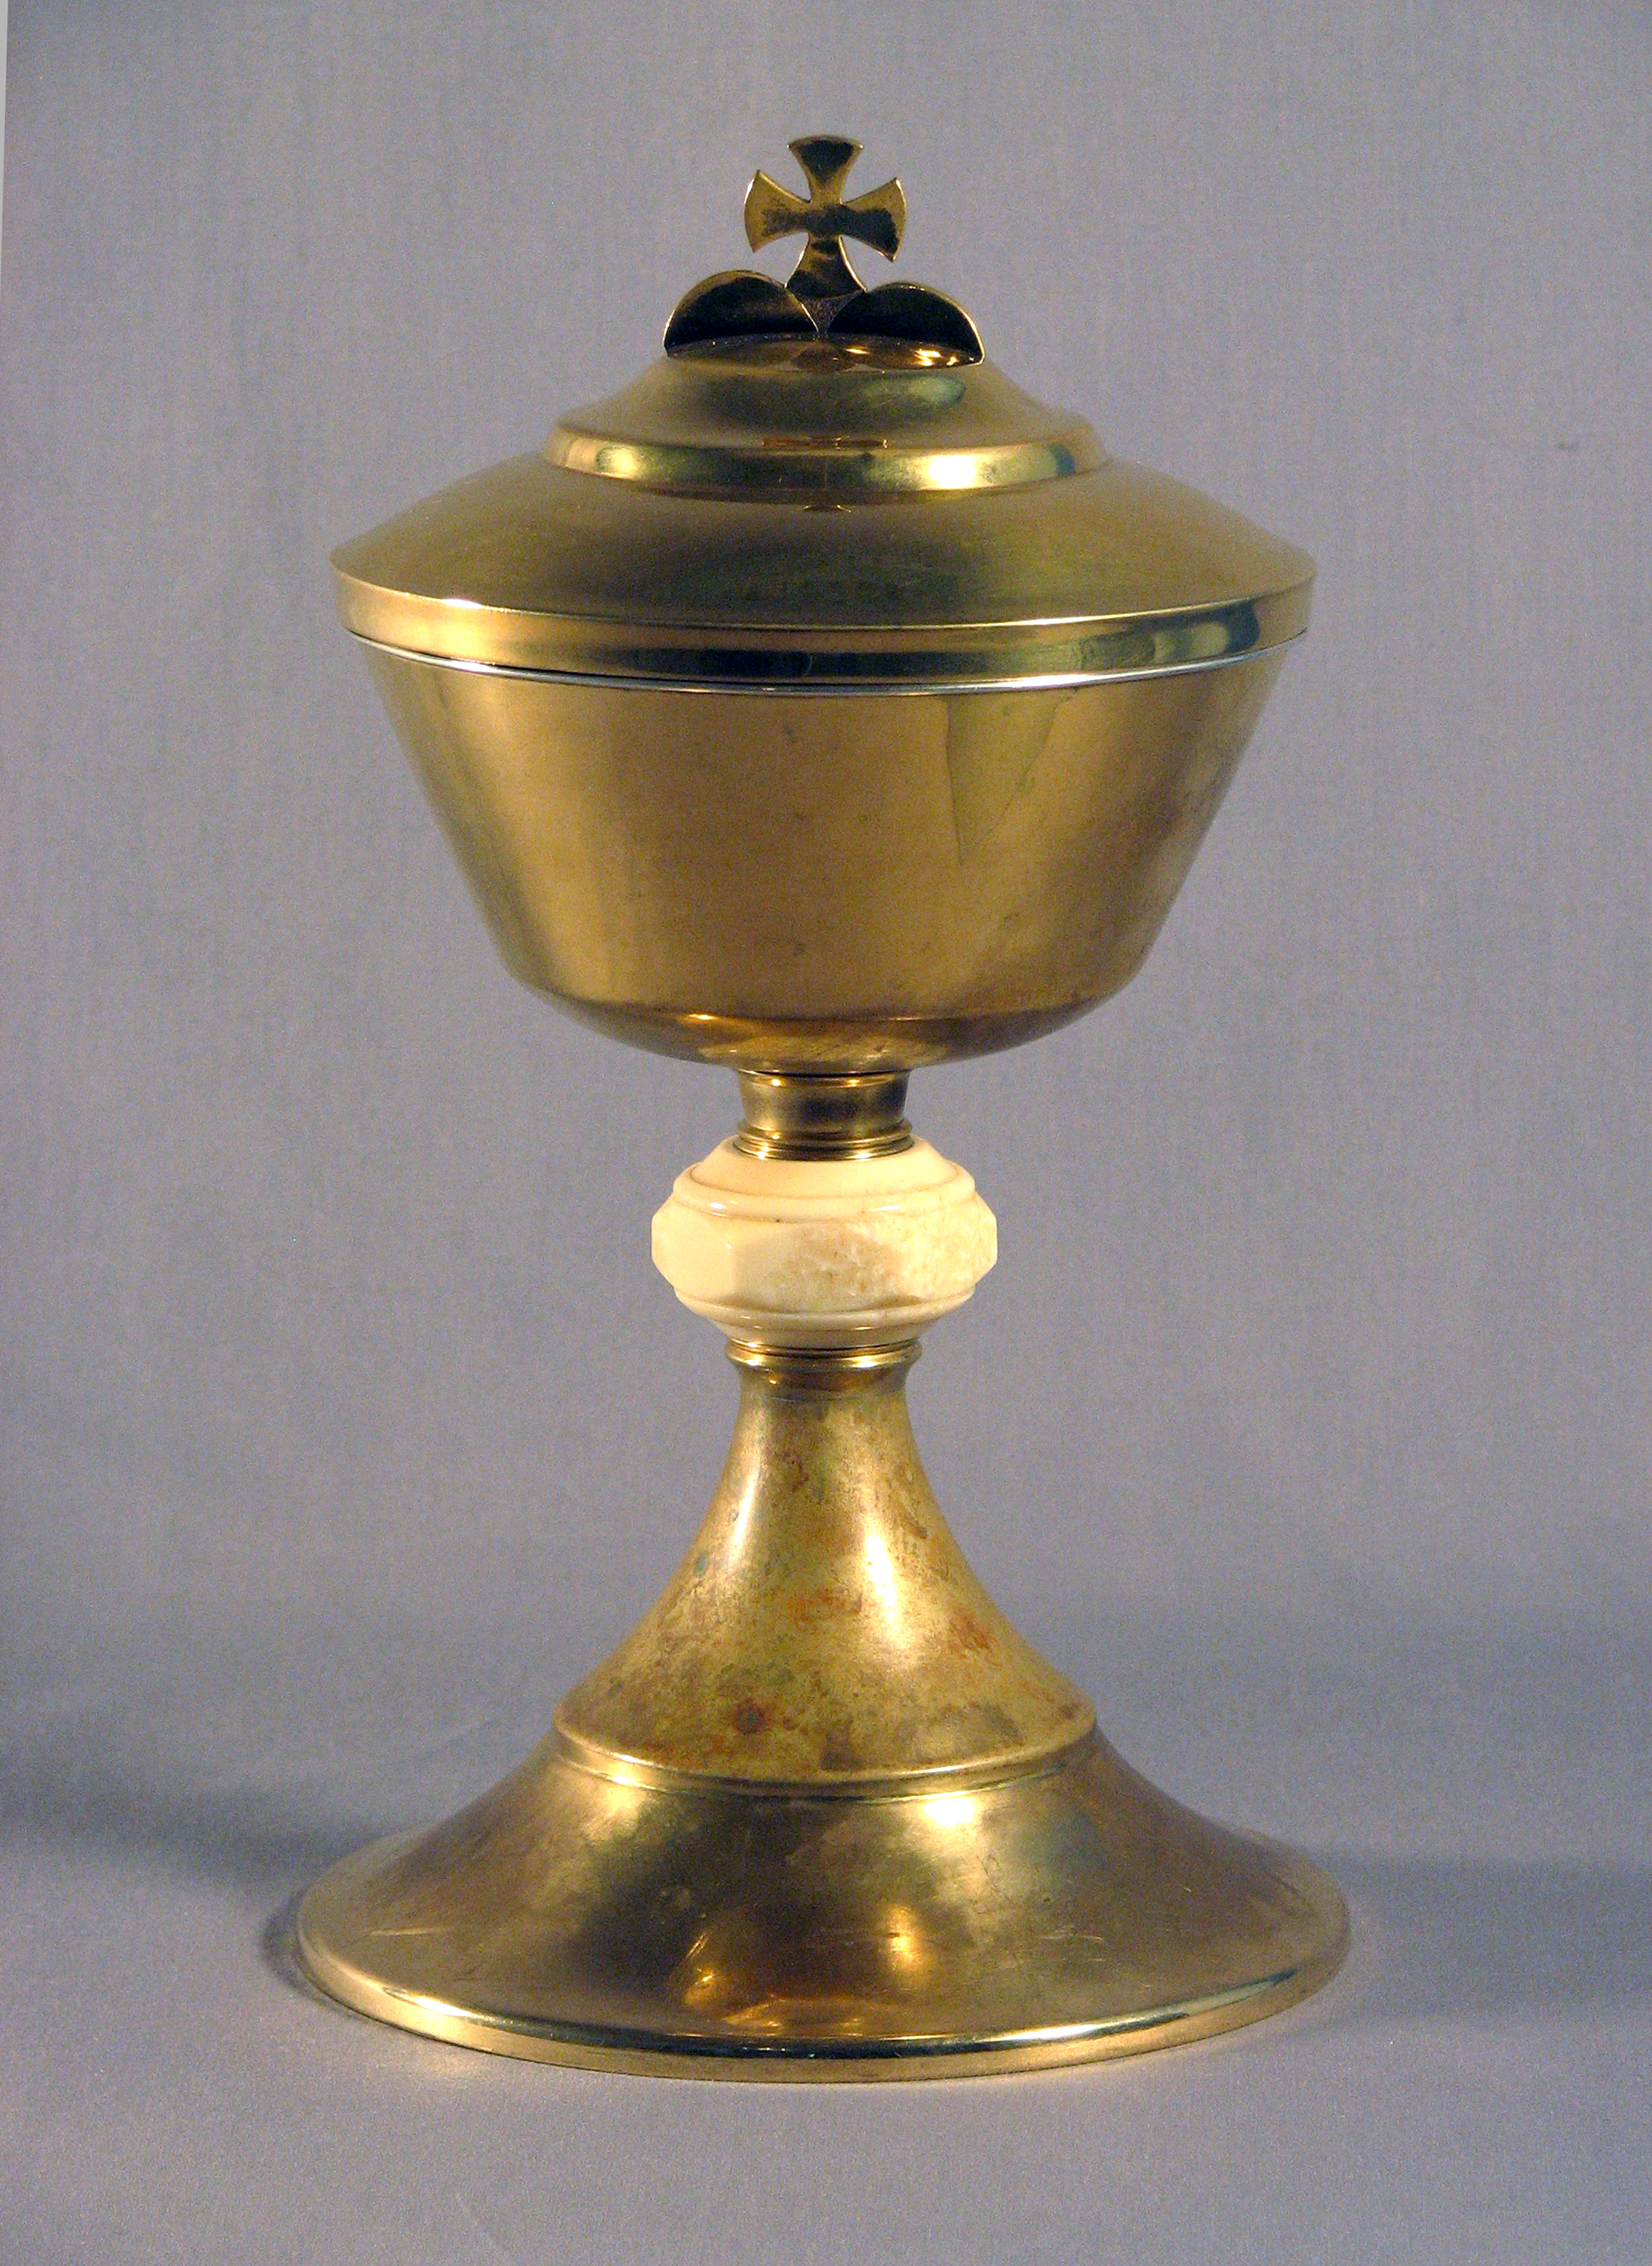 Color photograph, close-up of a religious object made of brass, gold and ivory, in the shape of a stemmed glass and cross-topped lid.